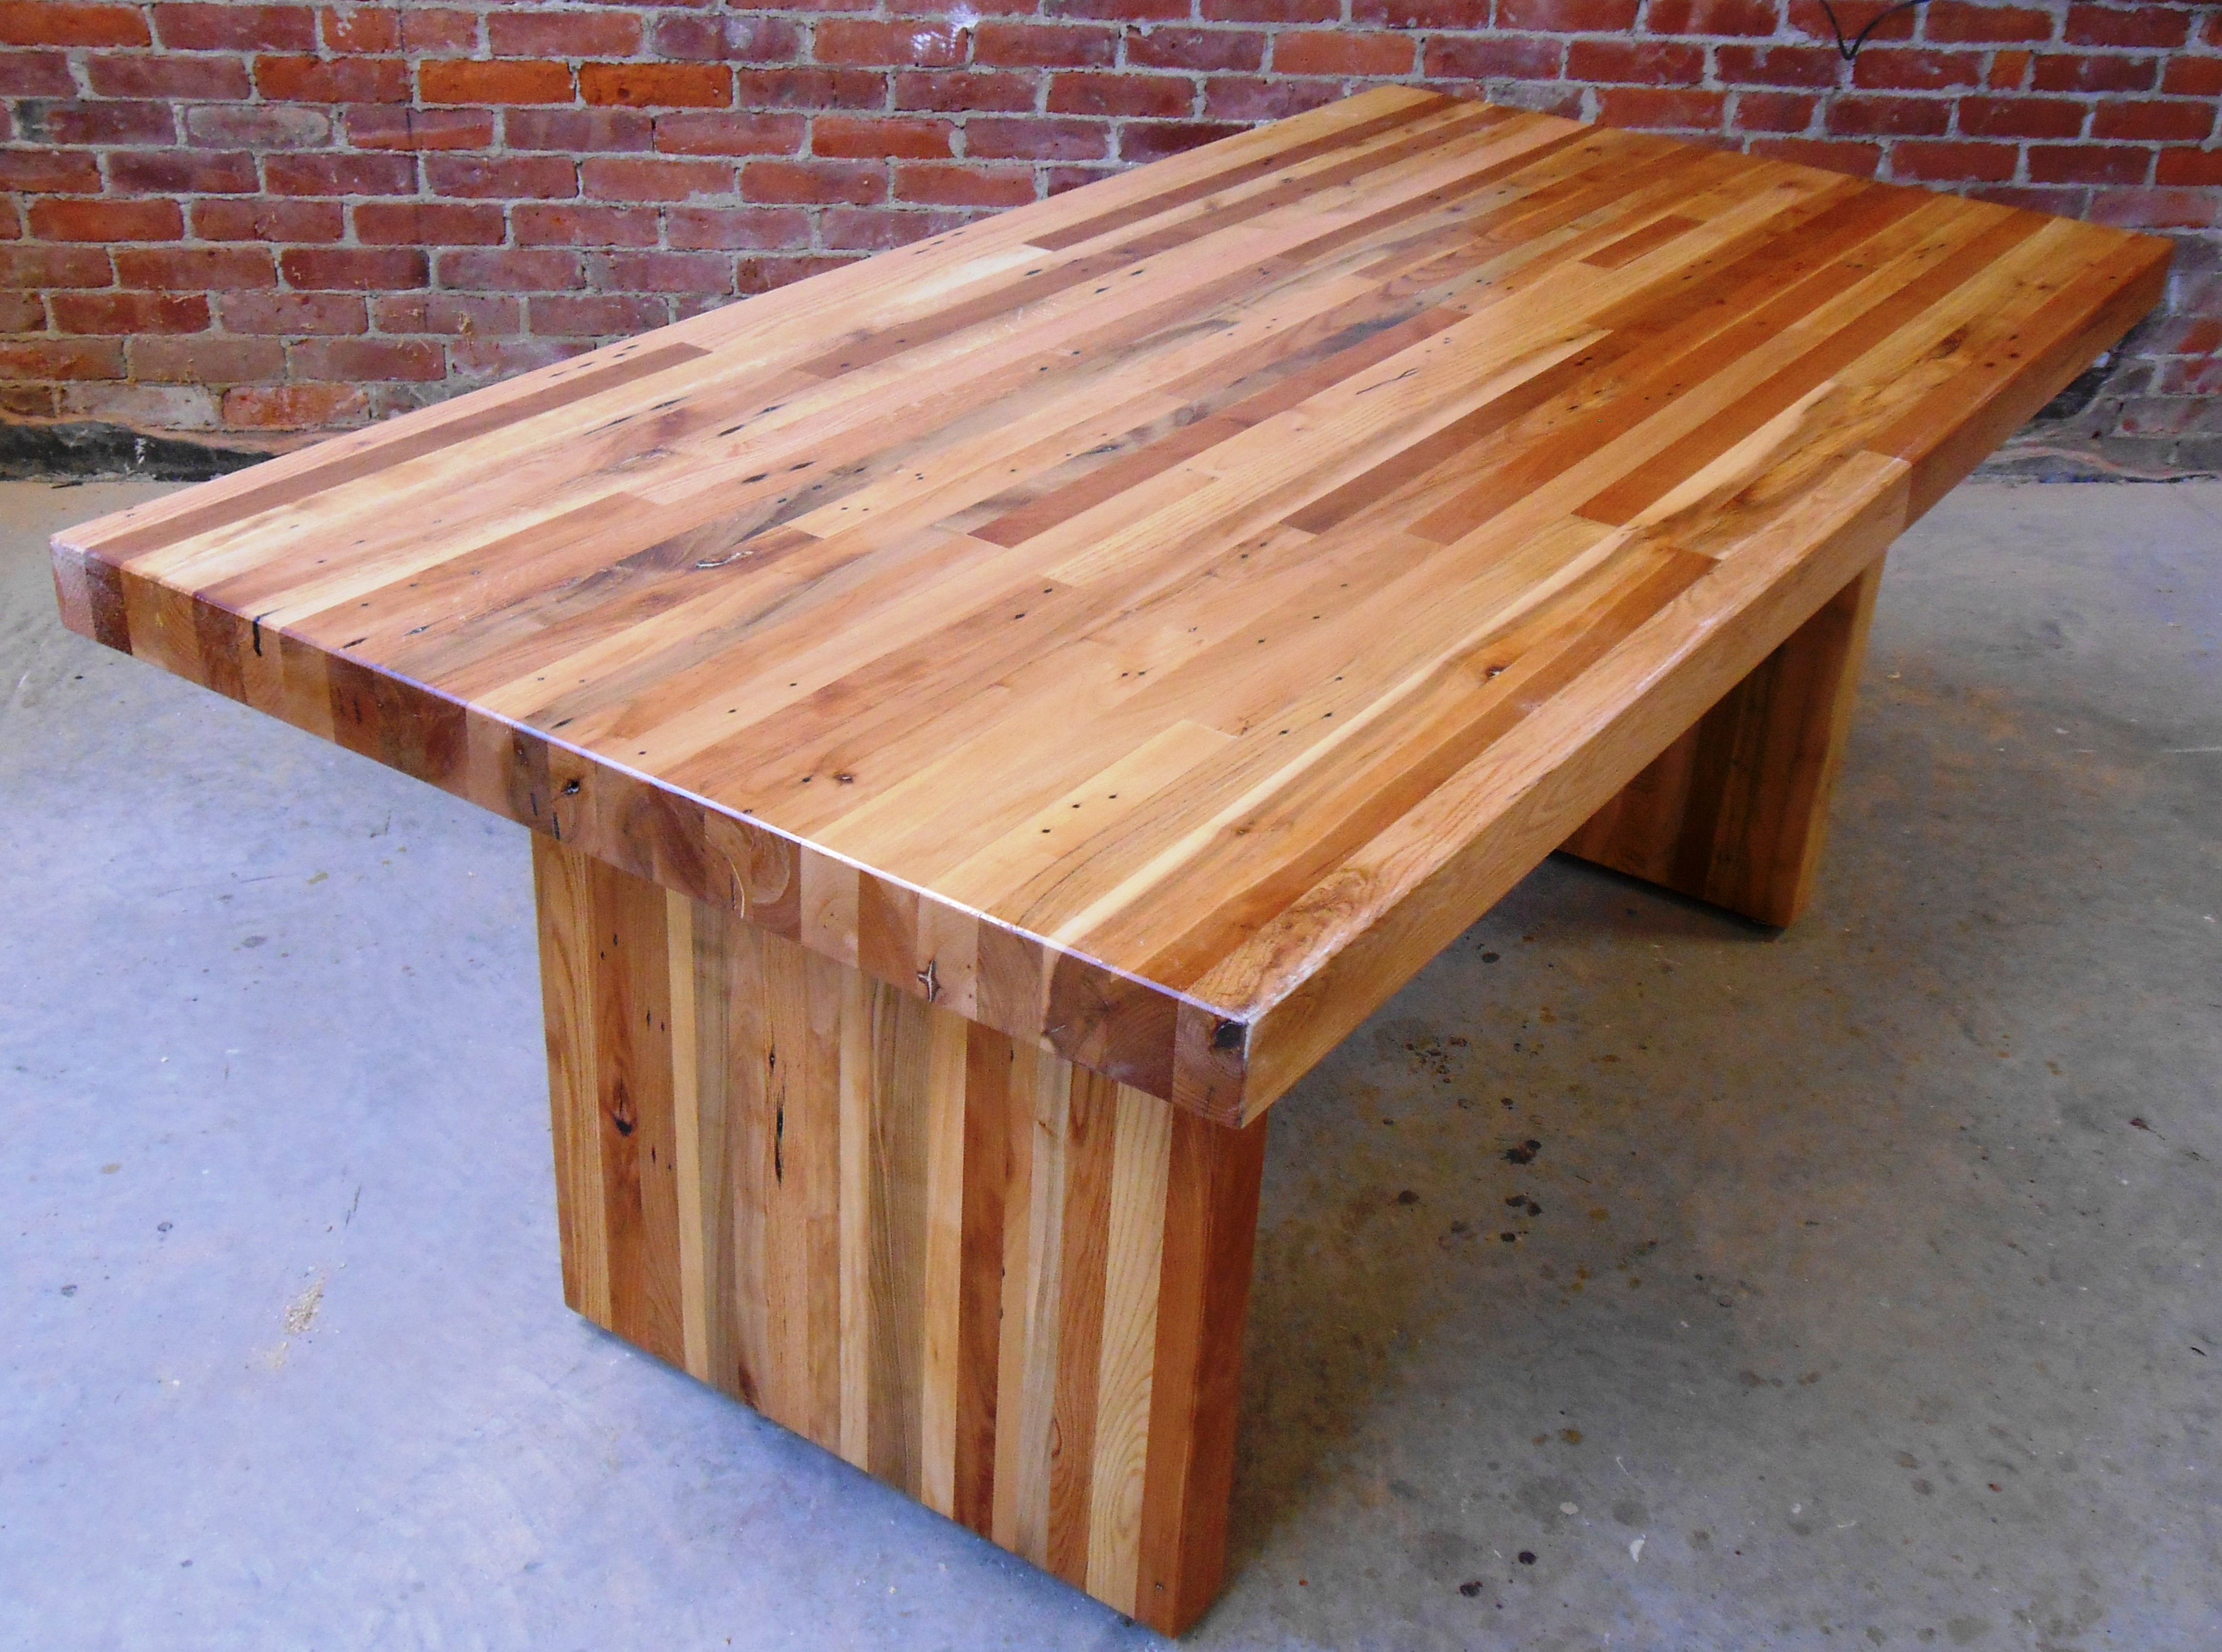 6' x 36" mixed pallet wood contemporary farm table